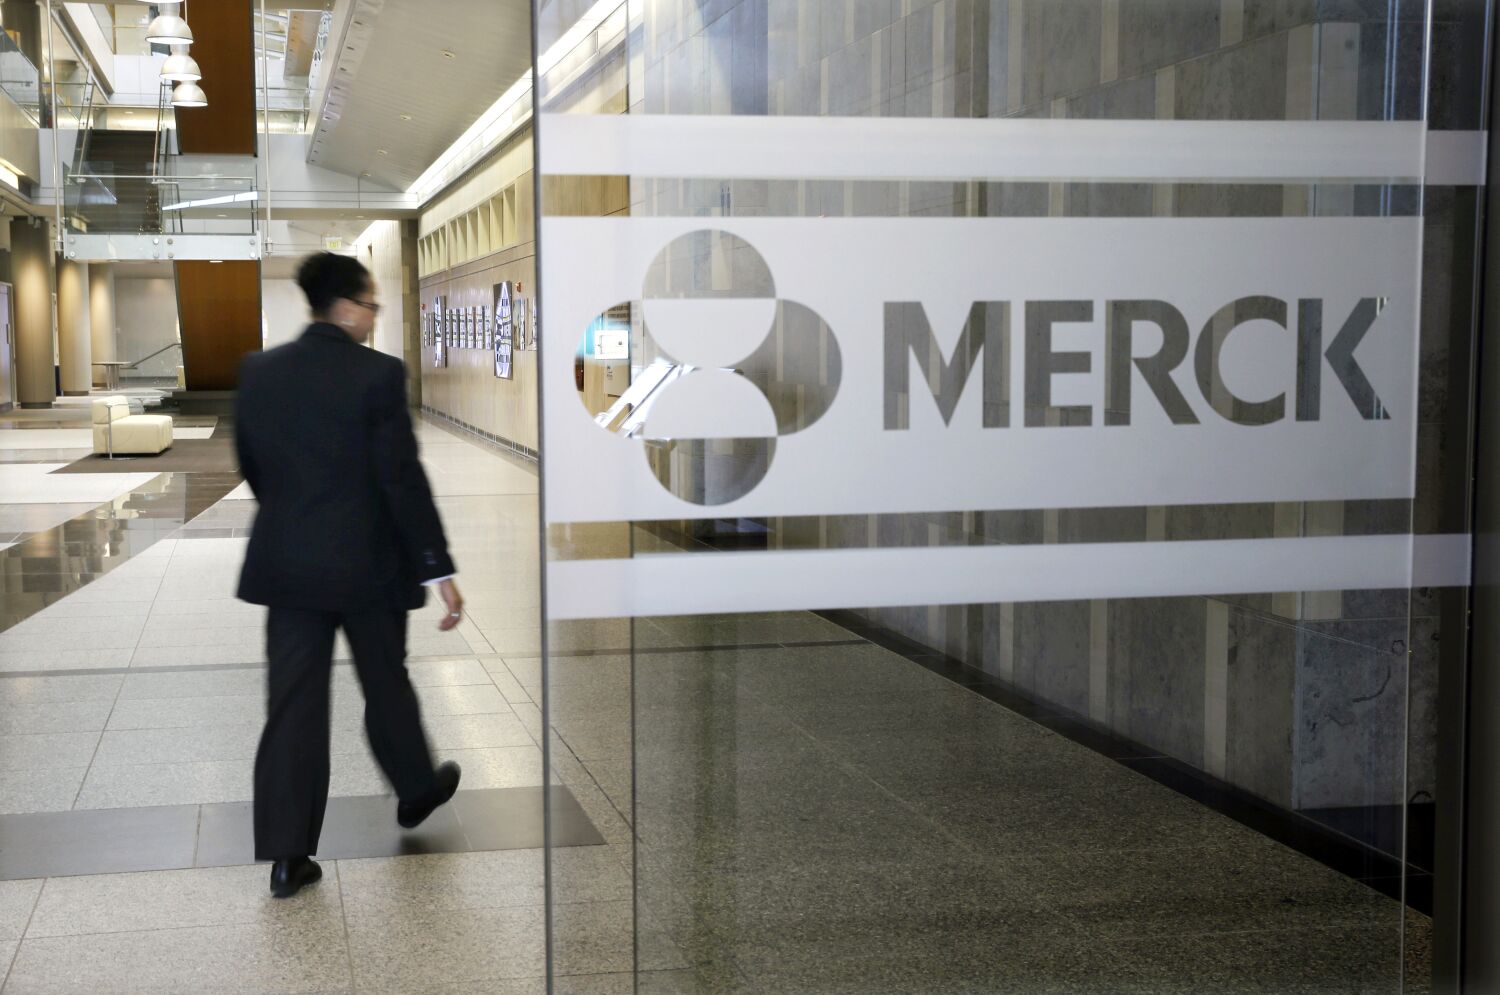 Column: Merck says it's being 'coerced' into negotiating its drug prices with Medicare. That's nonsense